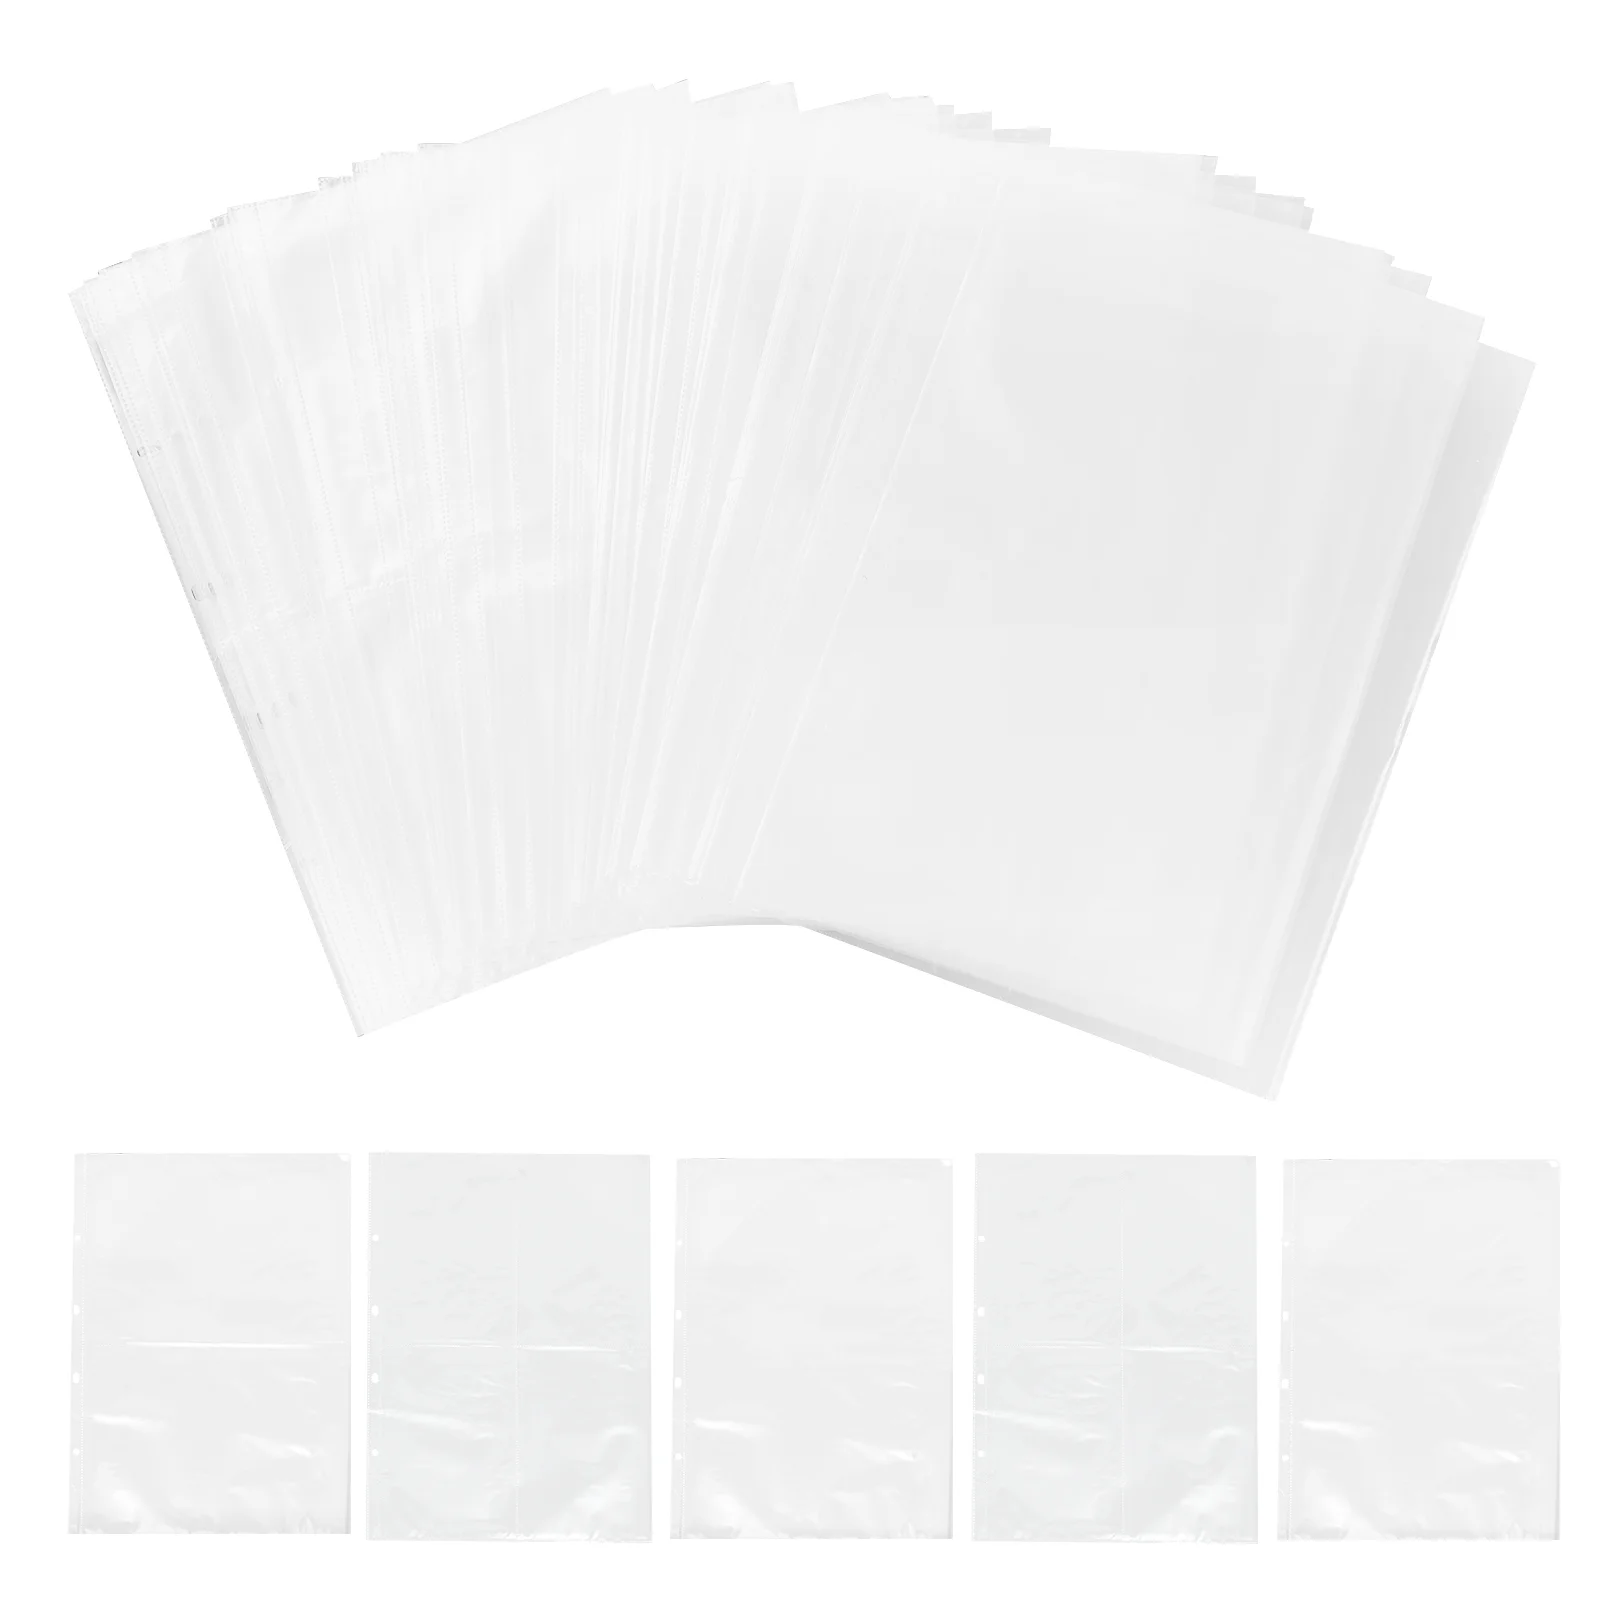 

40 Pcs Binder File Protection Bags Clear Folders Documents Plastic Page Protectors Loose Leaf Sleeves